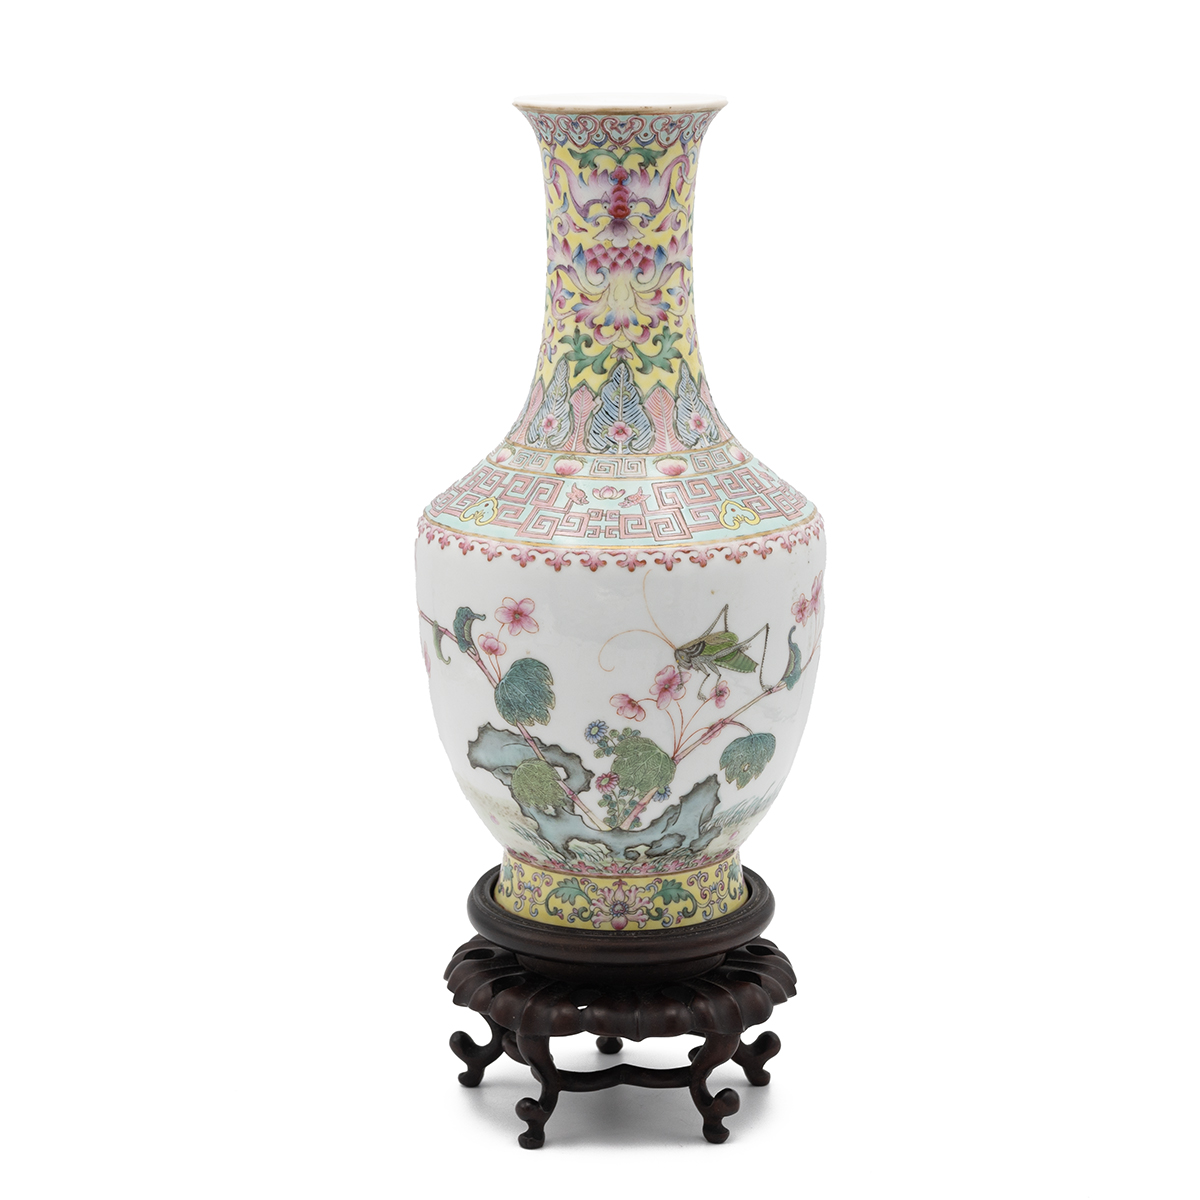 A Chinese Republic Period (1911-1949) baluster shaped famille rose vase on wooden stand, decorate...